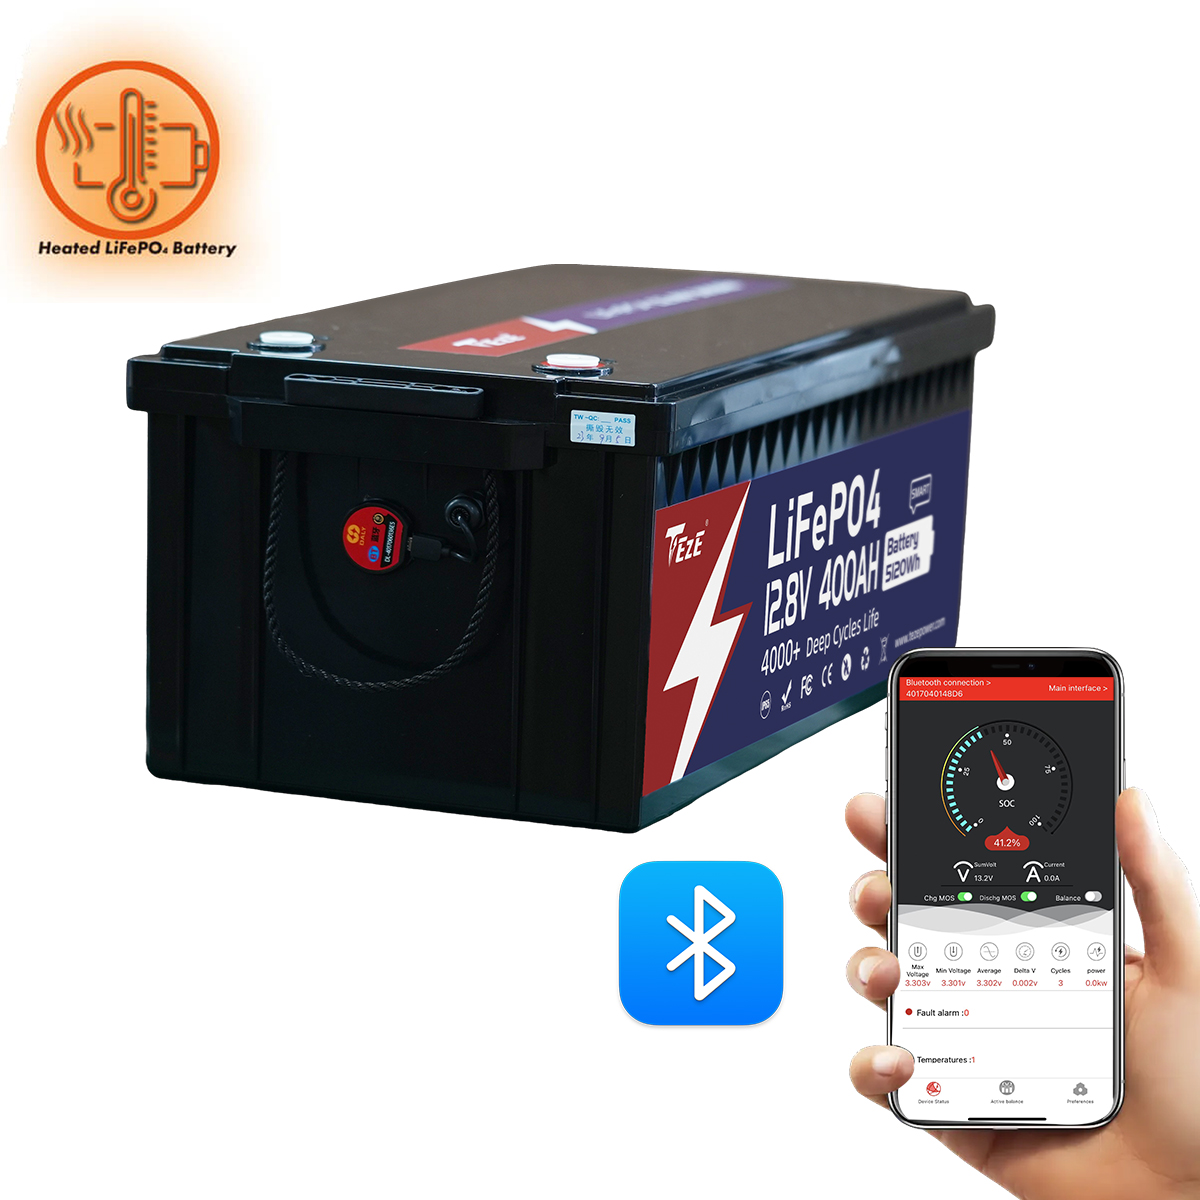 NEW-TezePower 12V400Ah LiFePO4 Battery with Bluetooth, RS485/RS232/CAN Communication Ports, Self-heating and Active Balancer, Built-in 250A Daly BMS (Bluetooth External Version)-TezePower